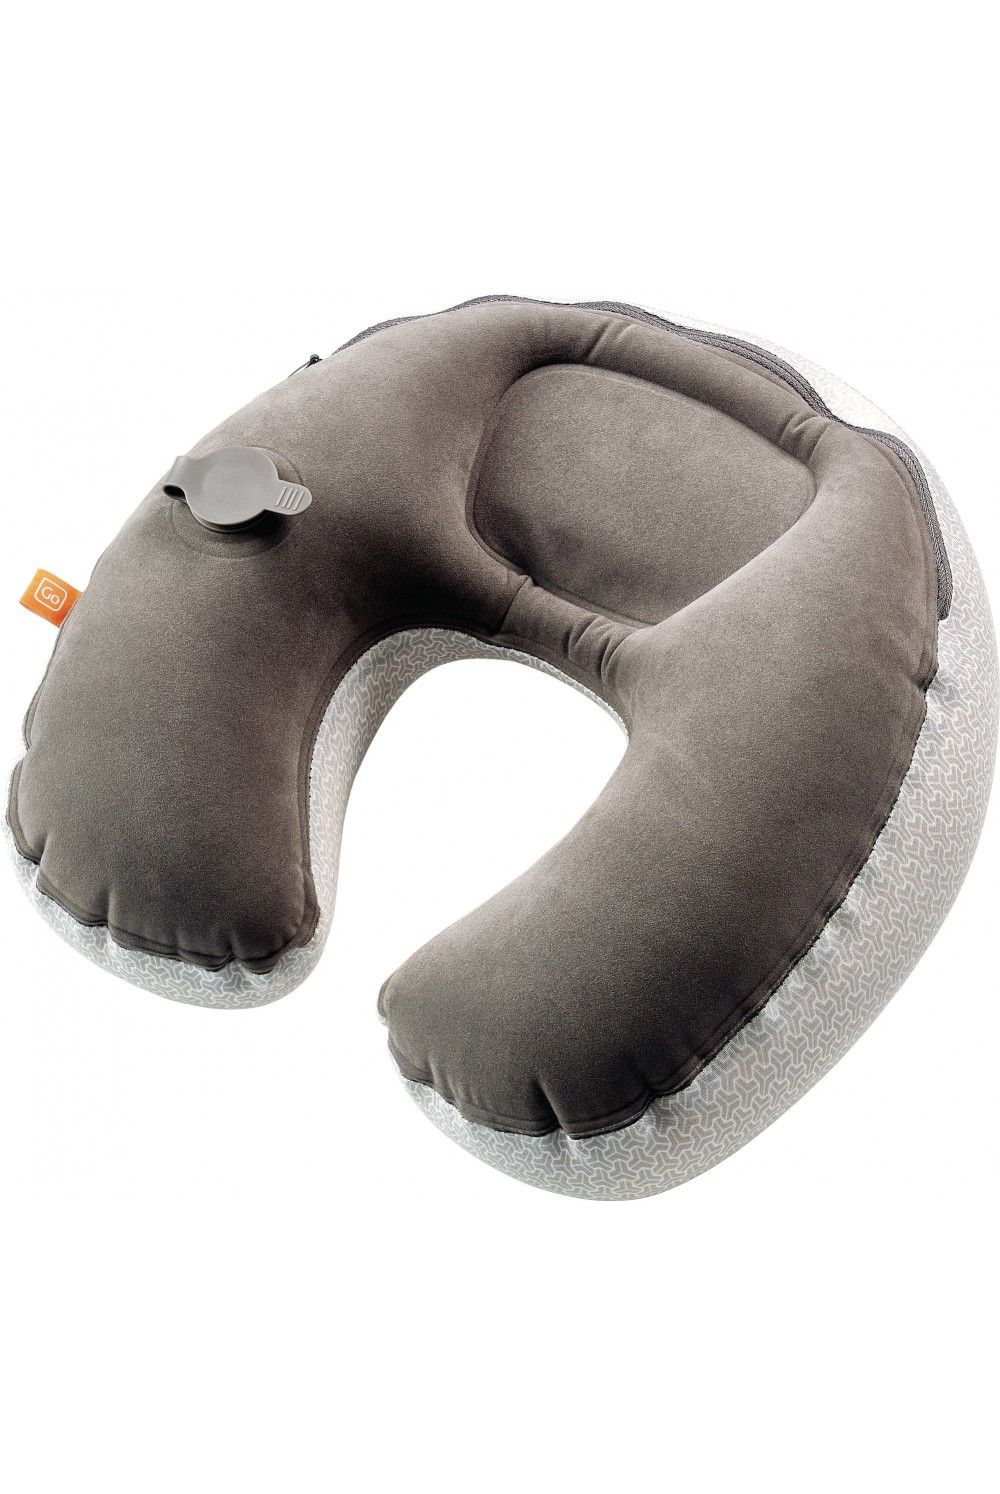 Go Travel inflatable memory foam neck pillow small stowable